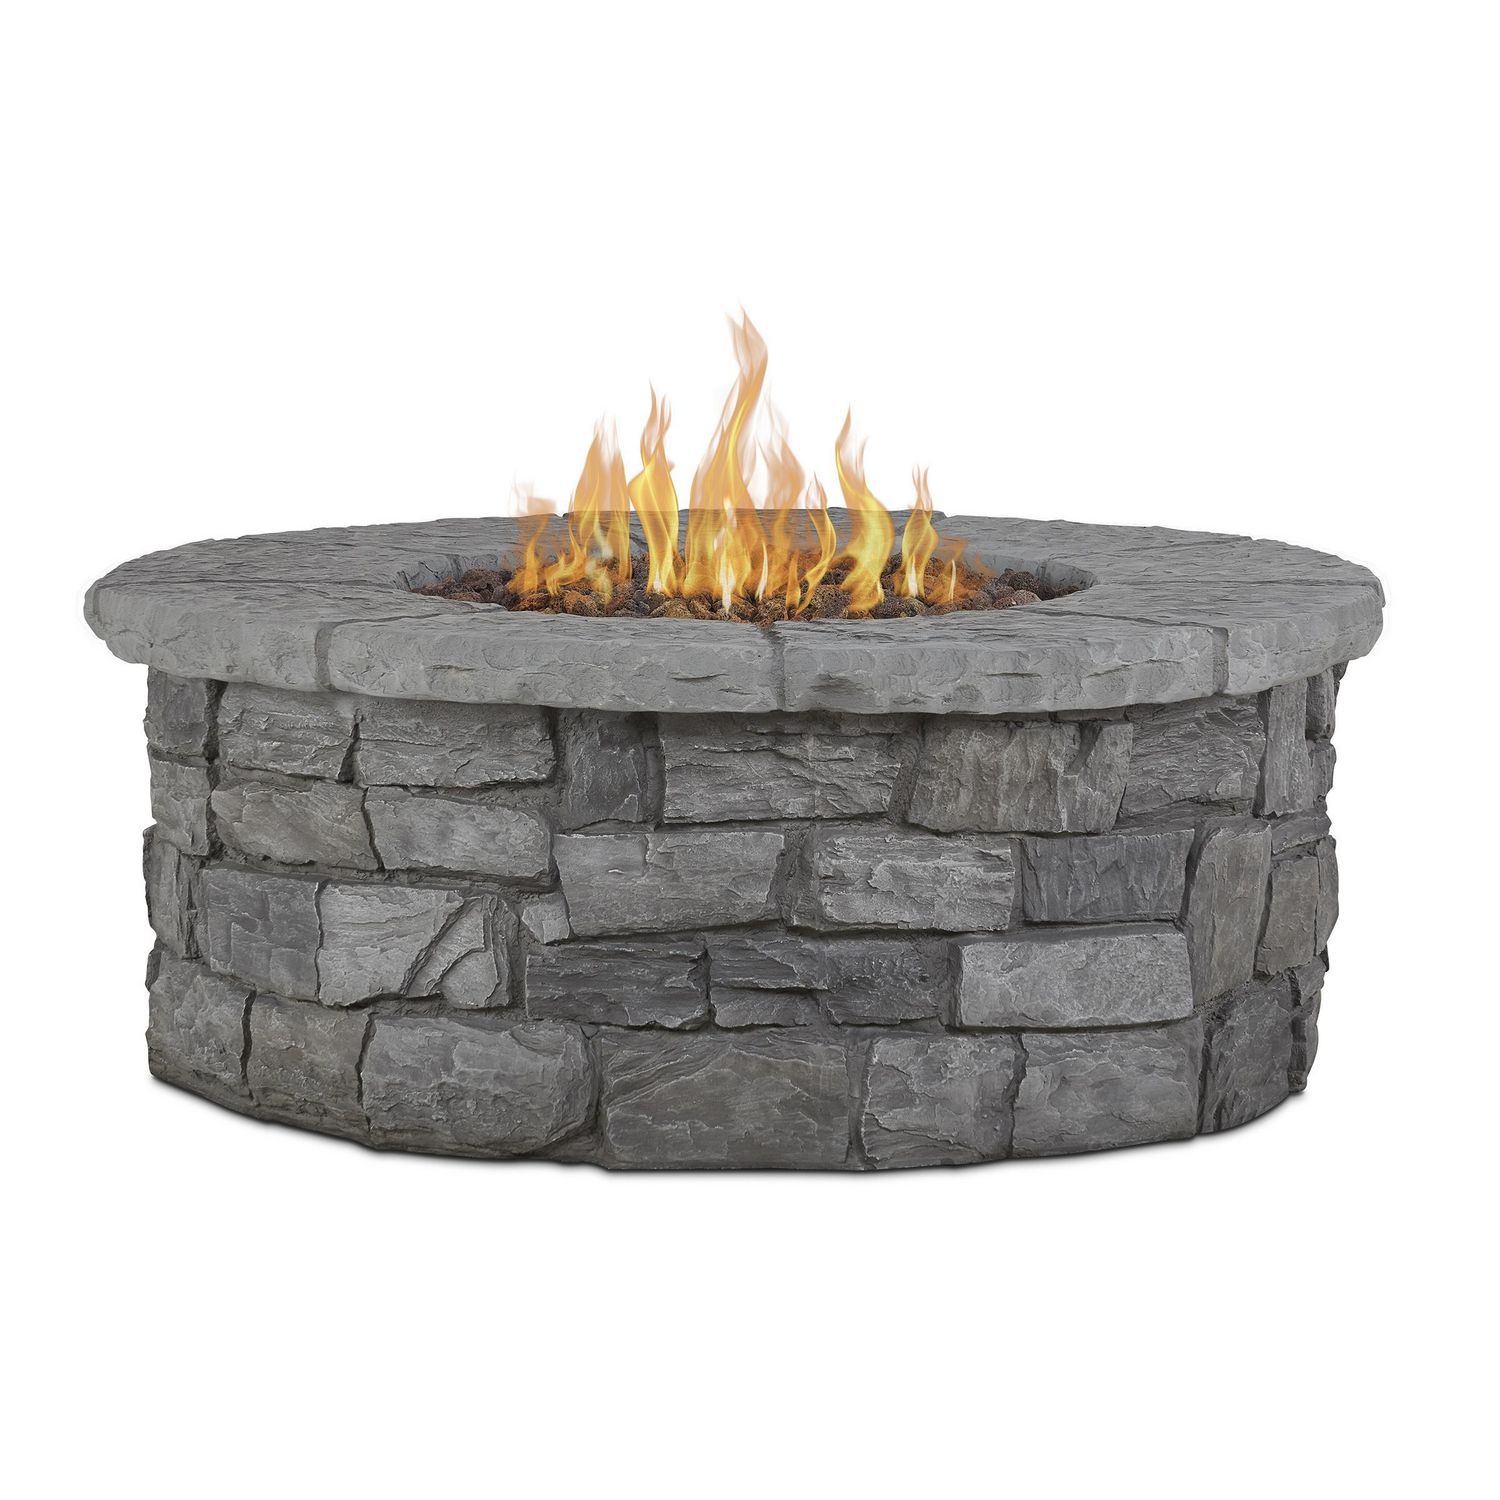 Sedona Round Propane Fire Table In Gray, How To Convert Propane To Natural Gas Fire Pit